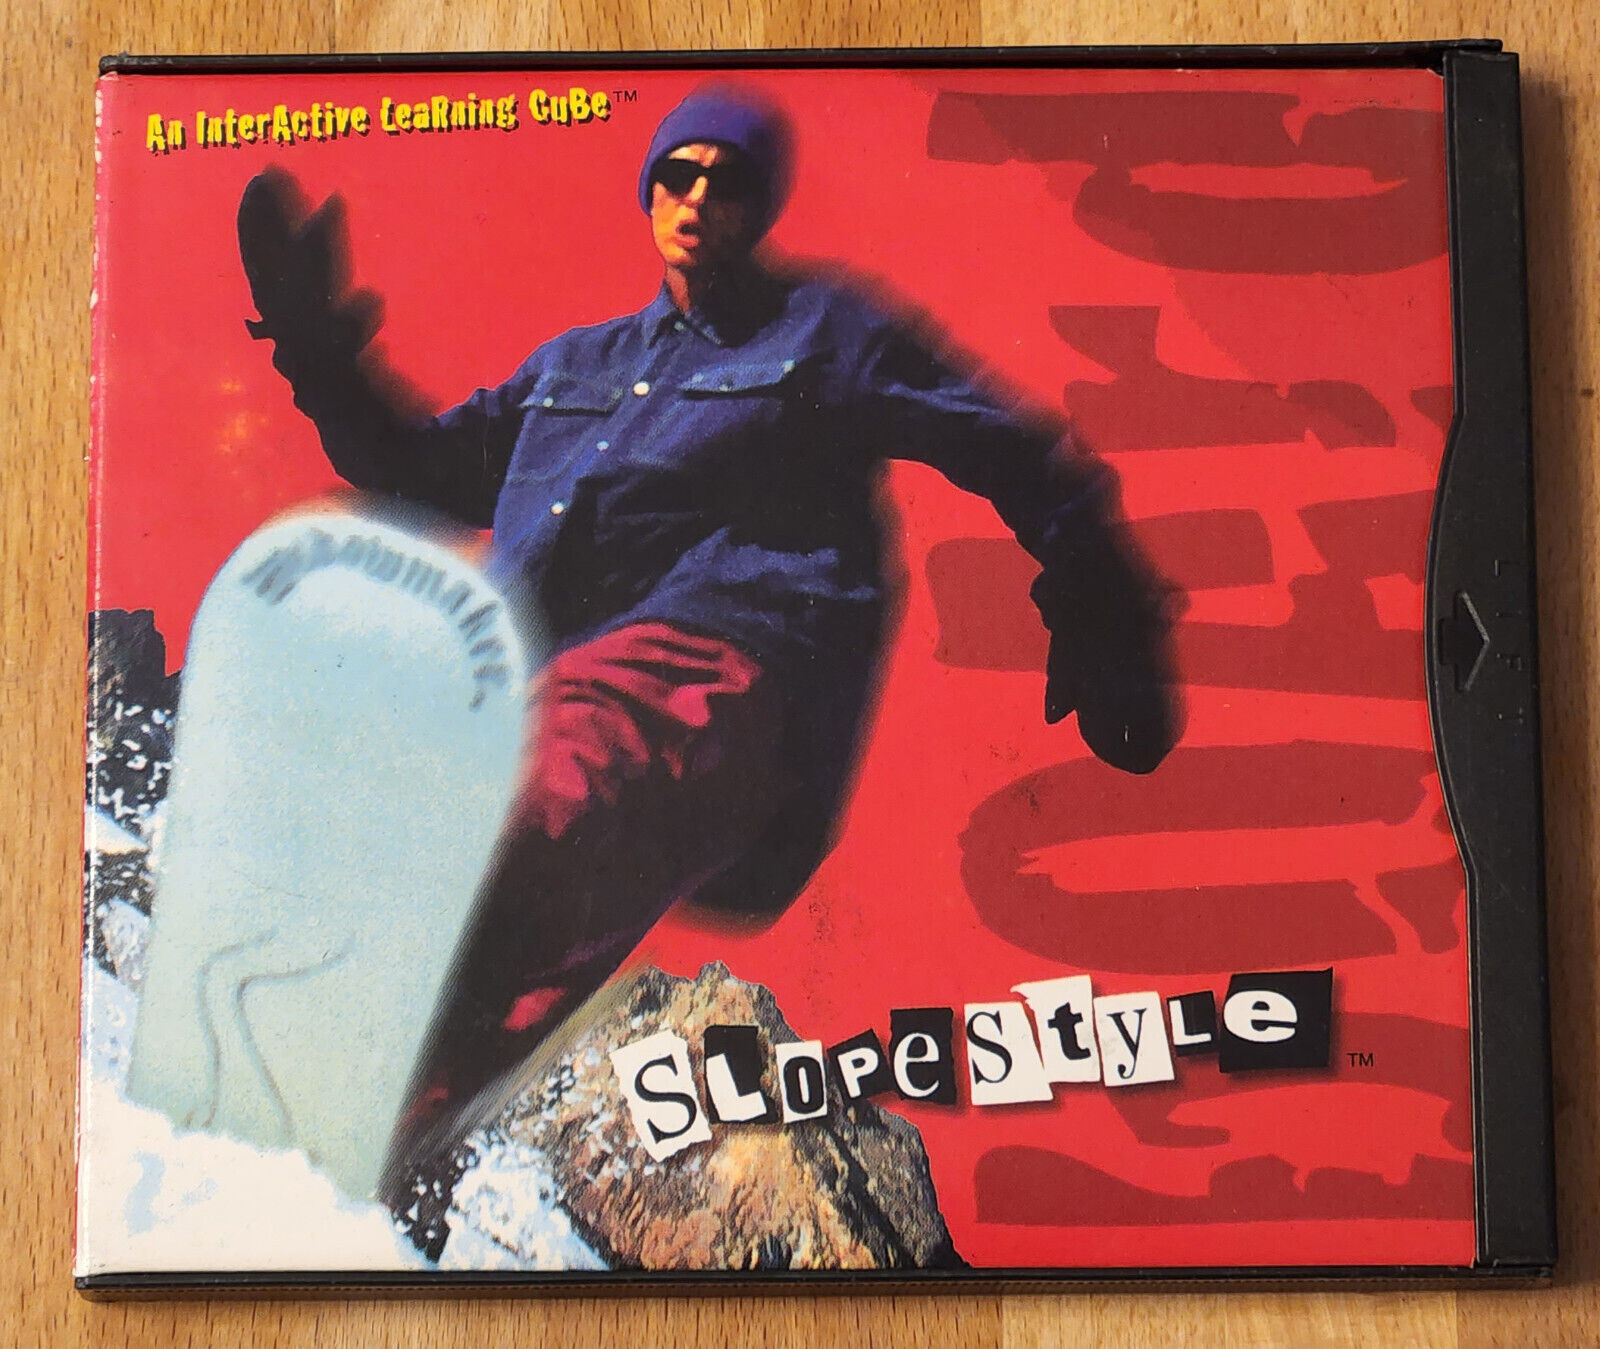 Slopestyle: An Interactive Learning Cube (3DO) (NO BOX/MANUAL) 100% TESTED! RARE